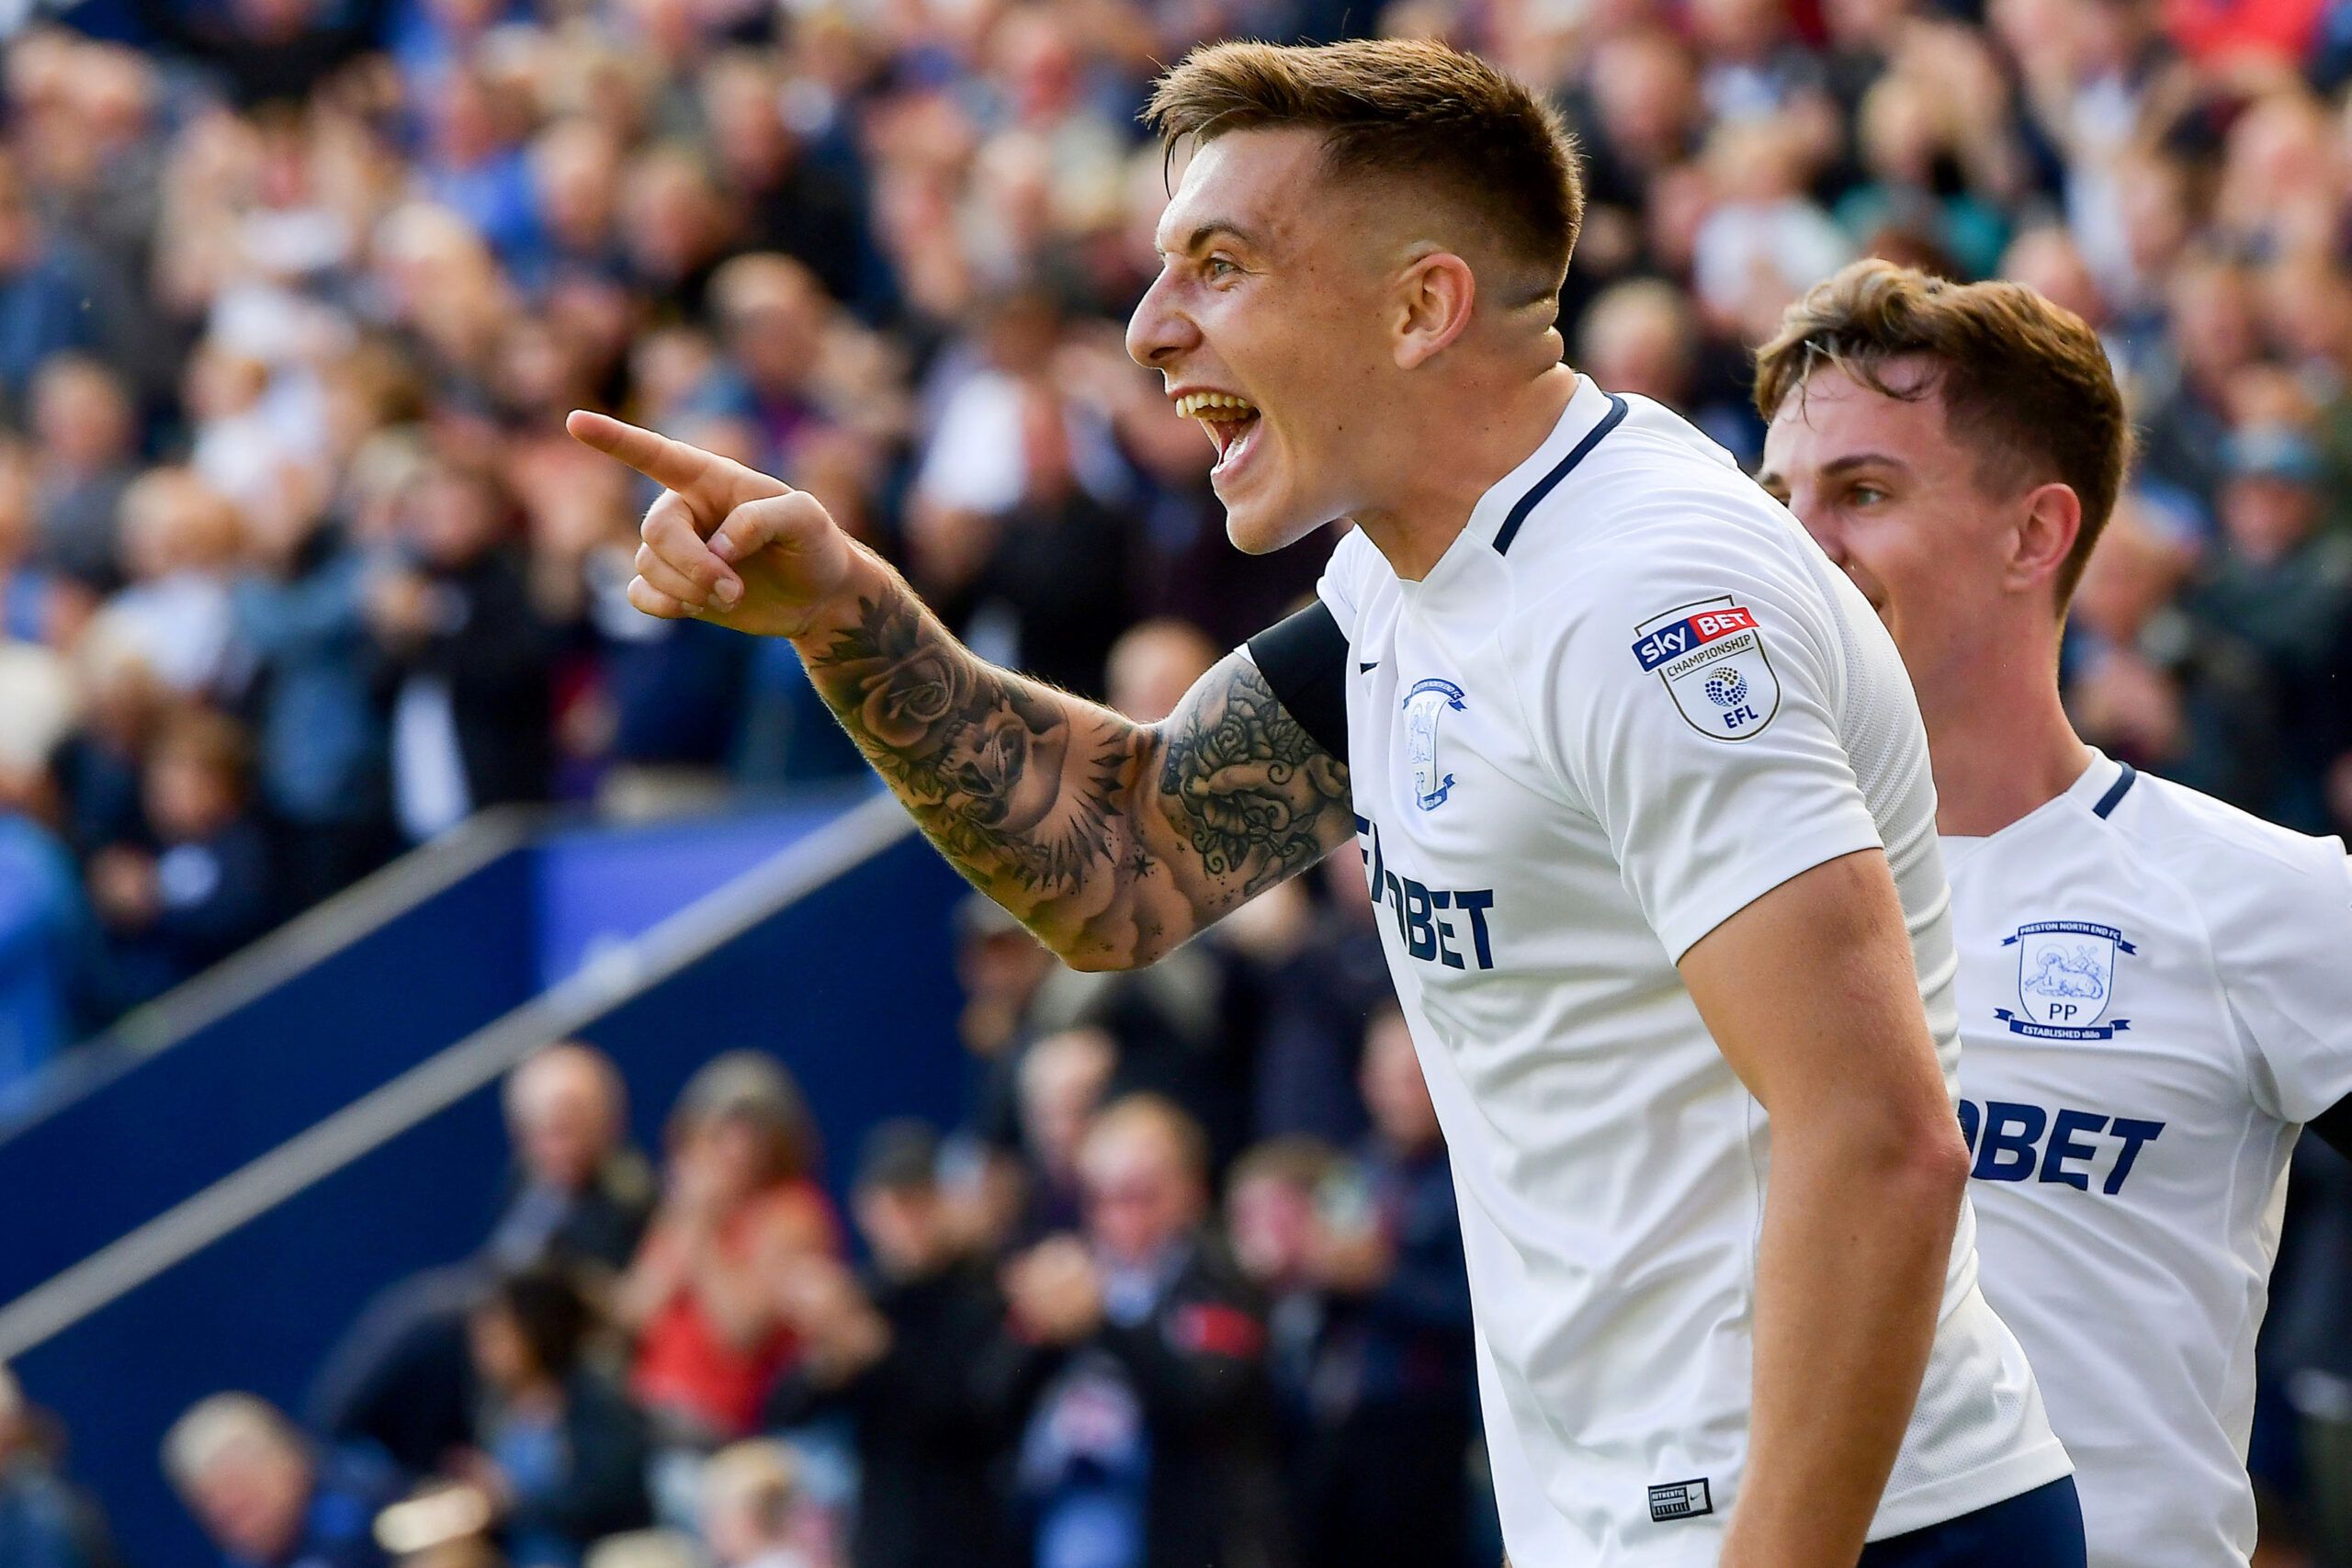 Soccer Football - Championship - Preston North End vs Reading - Preston, Britain - August 19, 2017   Preston's Jordan Hugill celebrates scoring their first goal   Action Images/Paul Burrows     EDITORIAL USE ONLY. No use with unauthorized audio, video, data, fixture lists, club/league logos or 